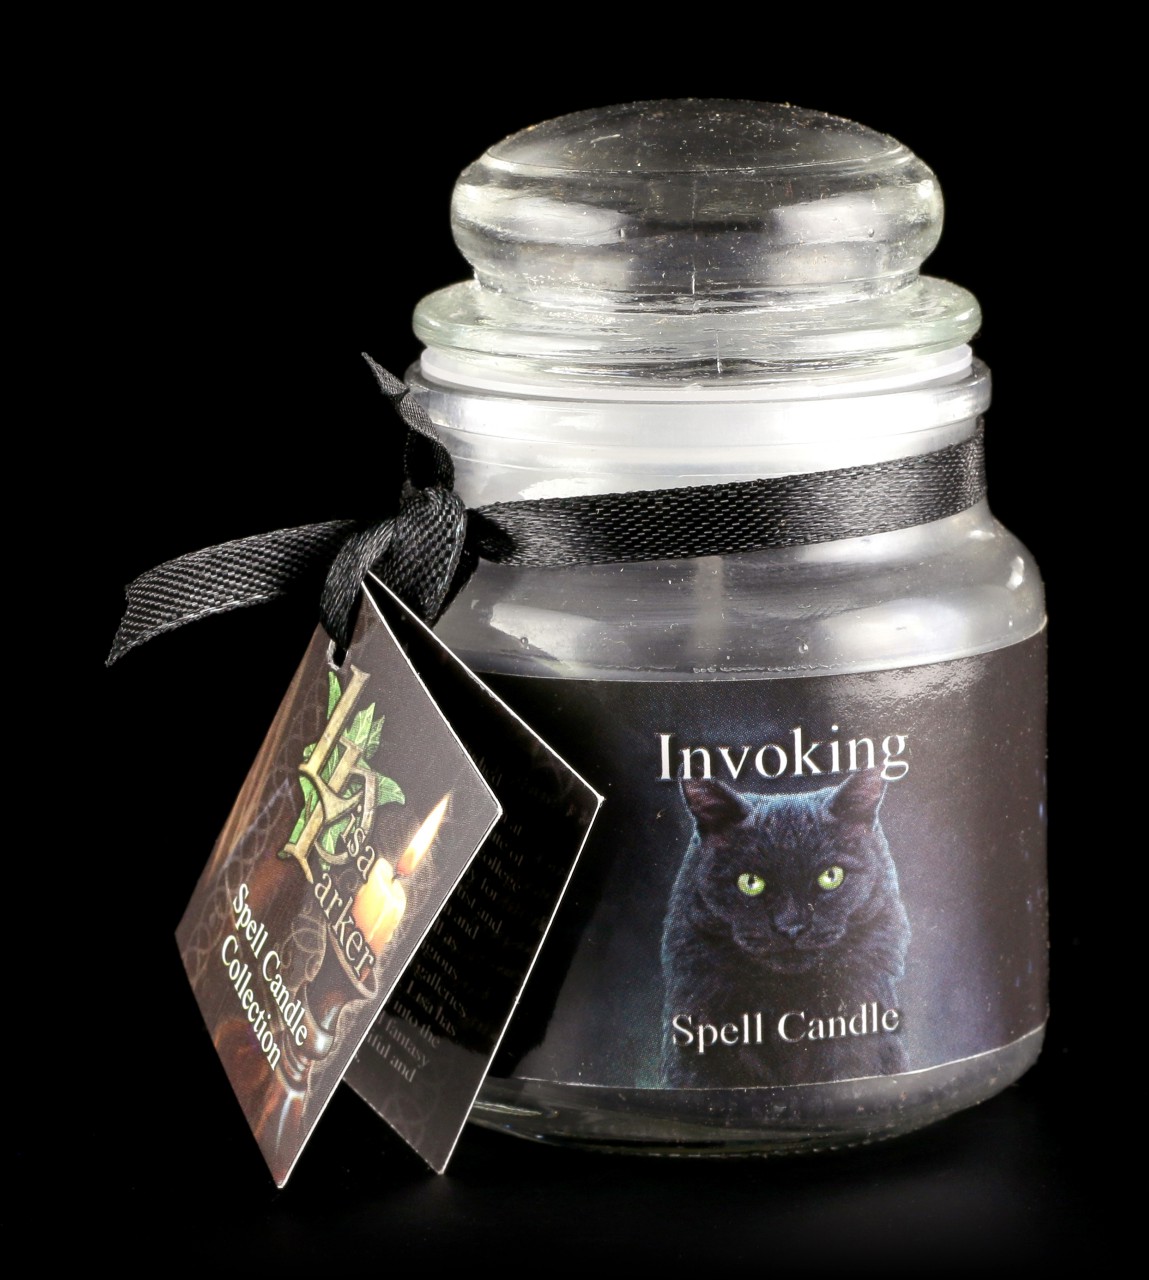 Spell Candle - Invoking - Dragon's Blood